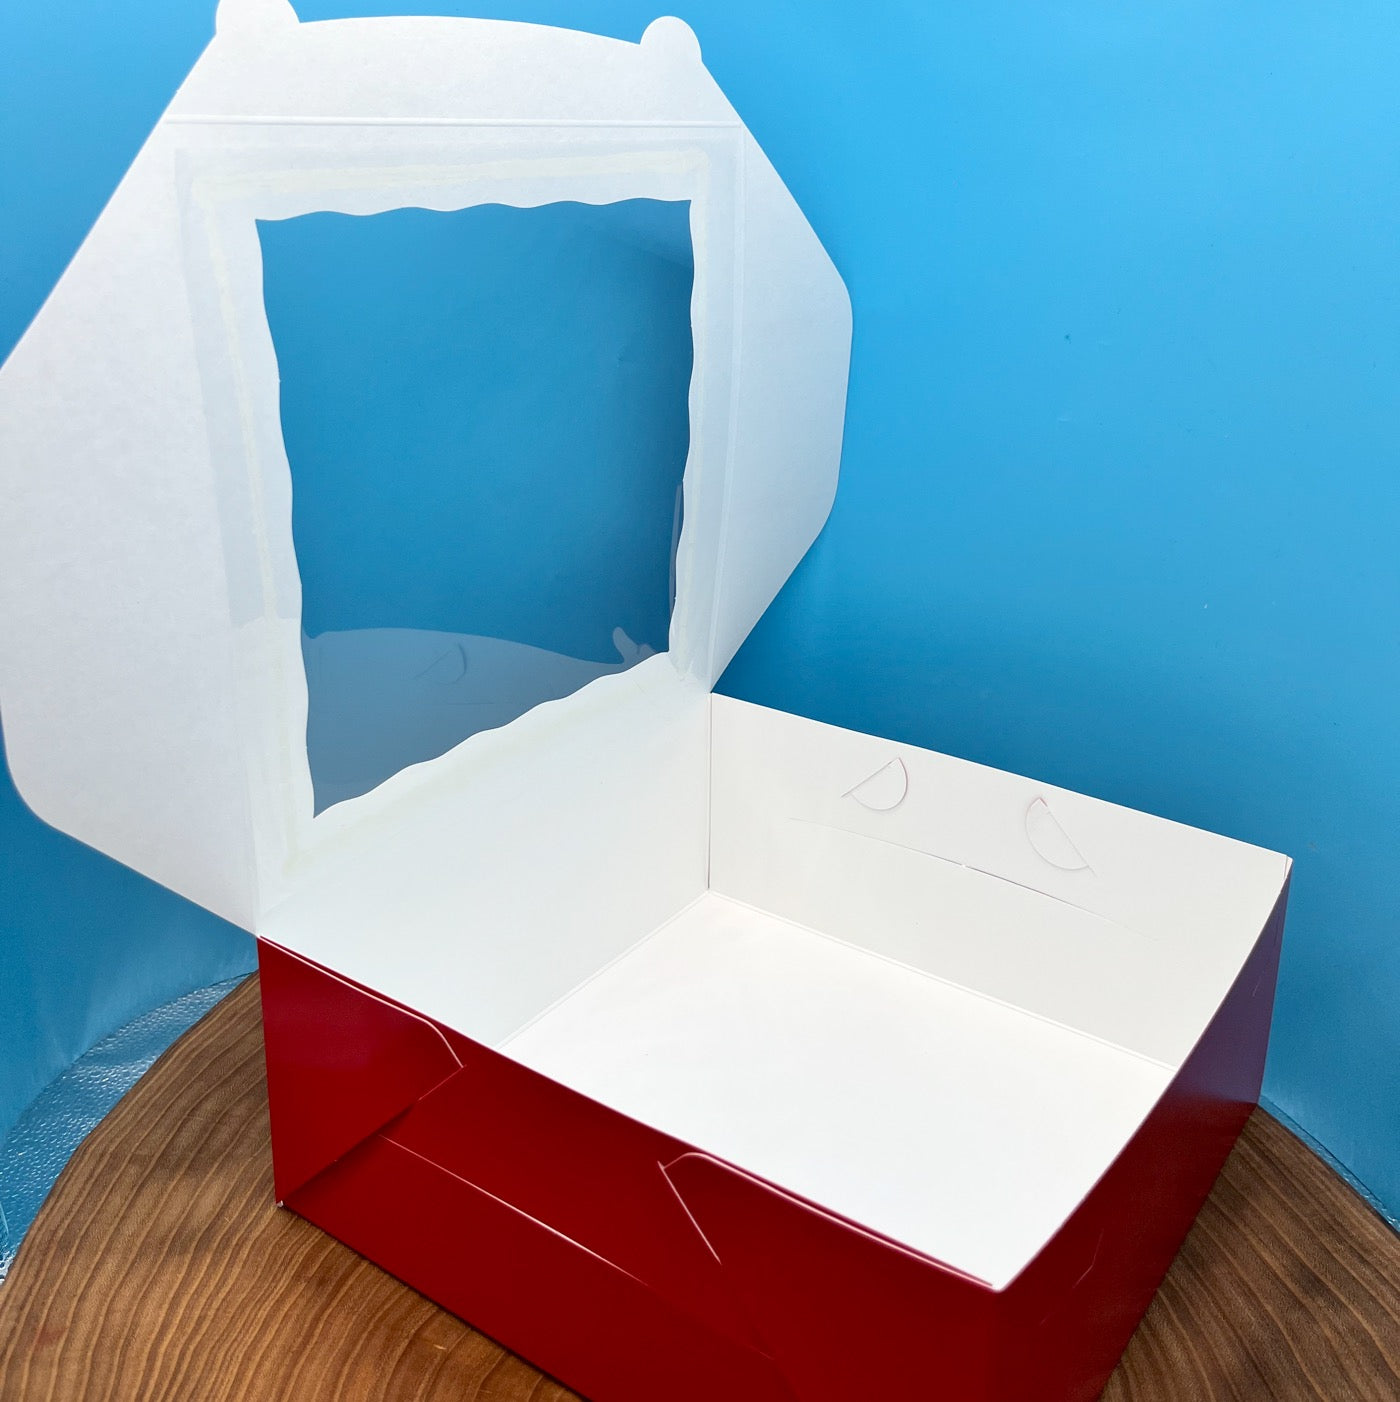 10 Inch Red Pastry Box with a Window - 10x10x4